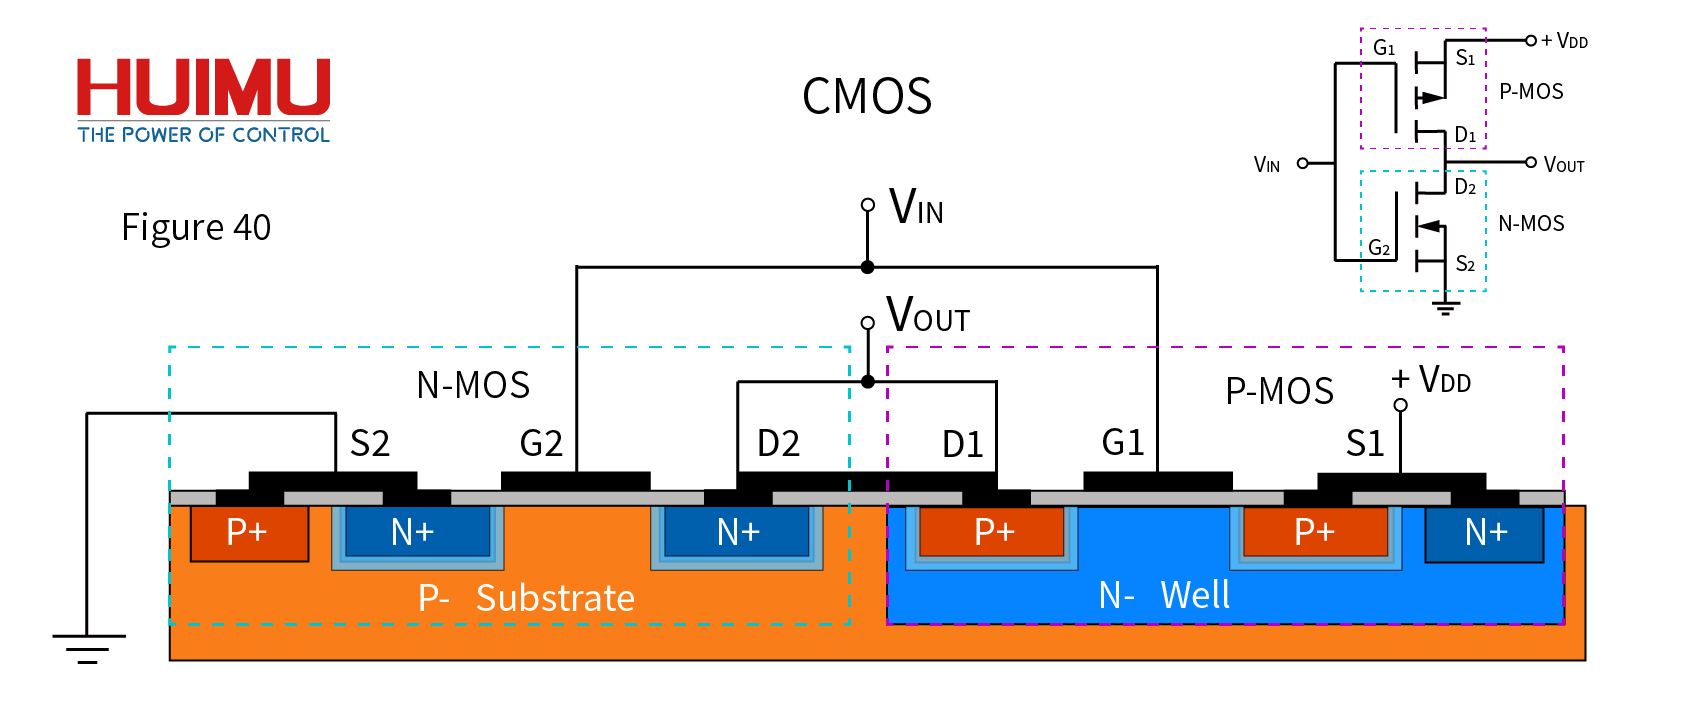 The Structure and Symbol of CMOS